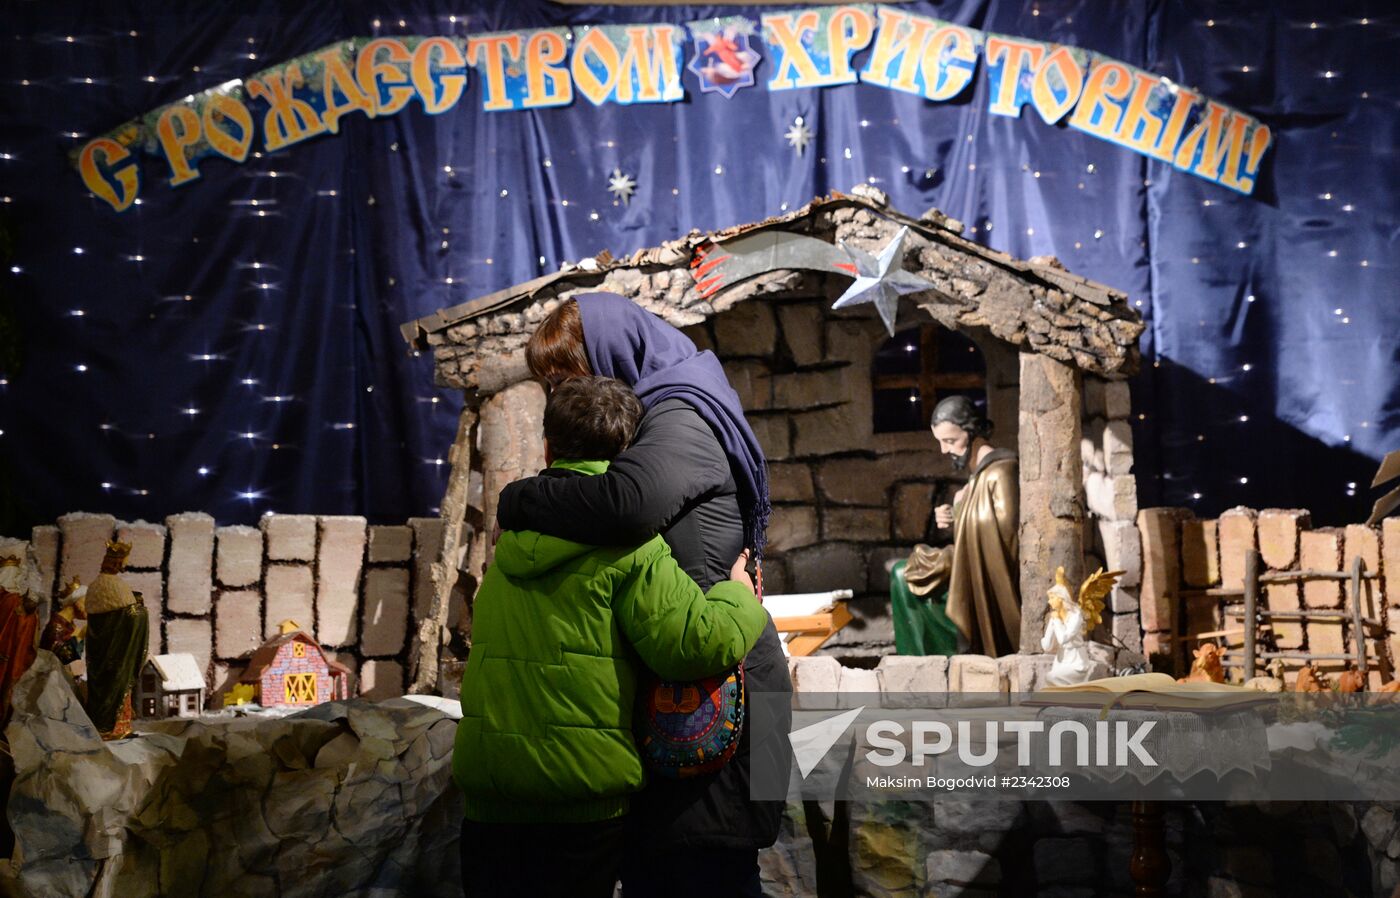 Celebrating Christmas in Russia